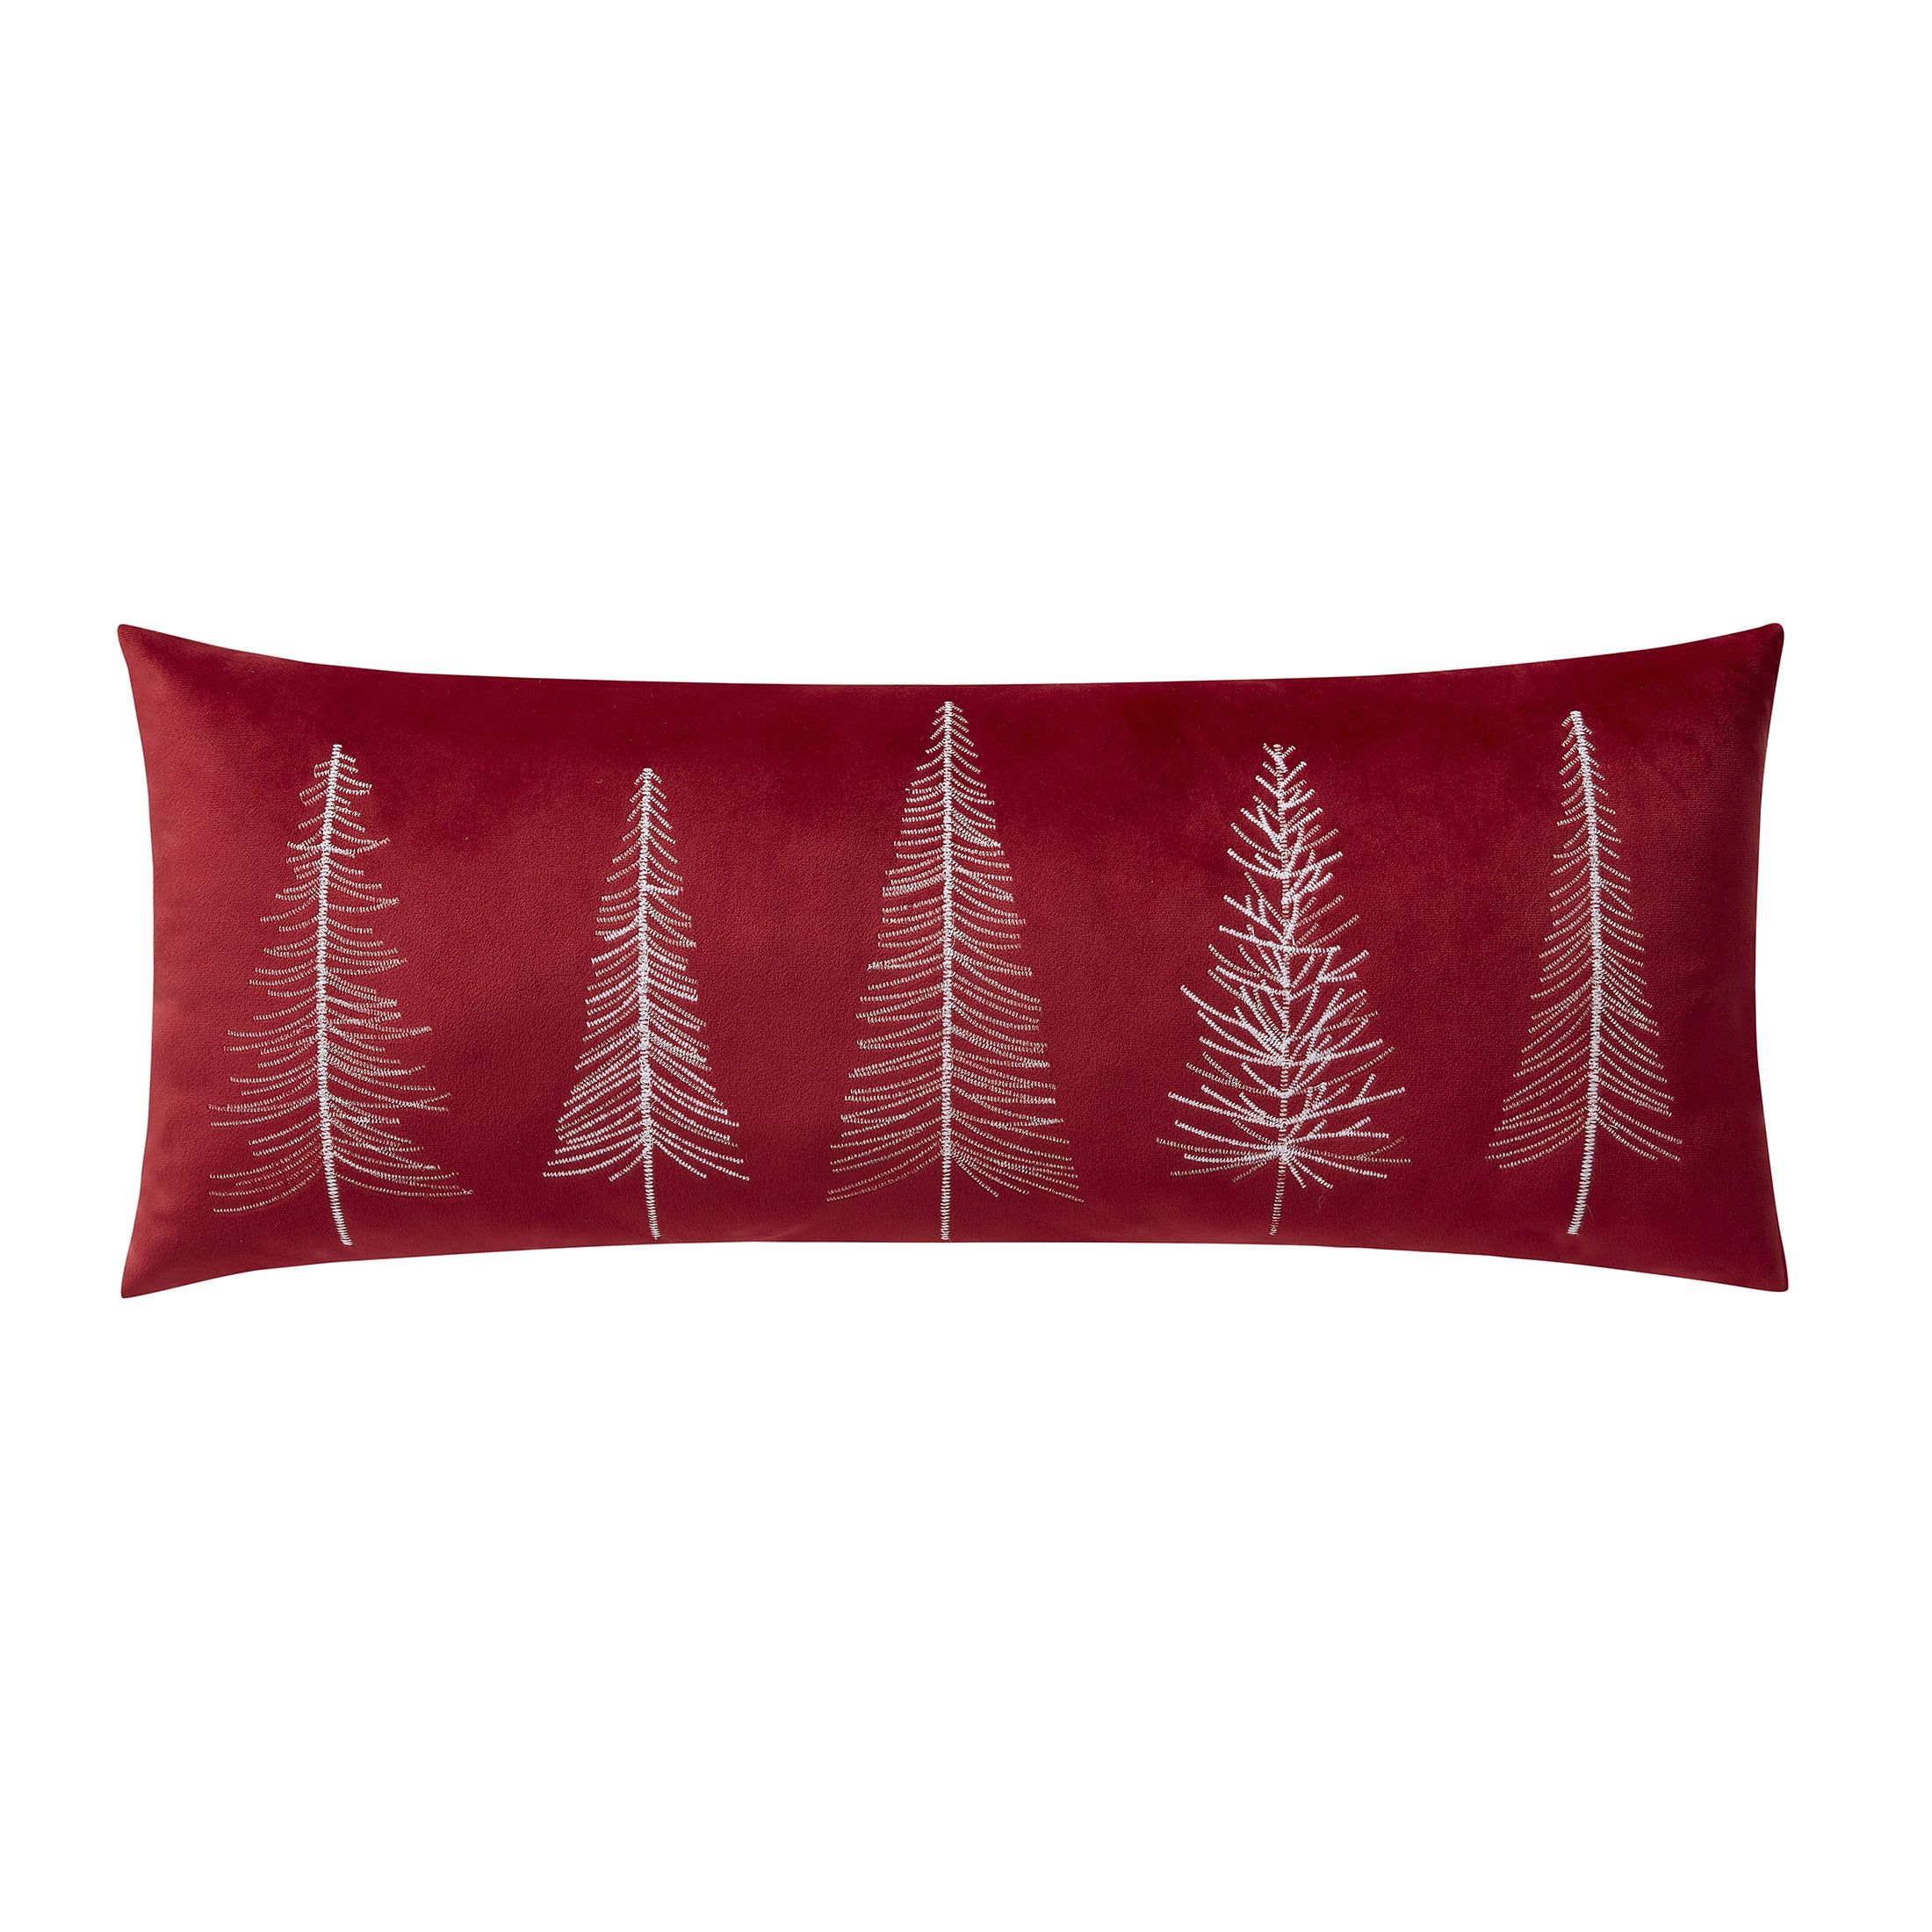 My Texas House Holiday Tree 12" x 28" Red Velvet Decorative Pillow Cover | Walmart (US)